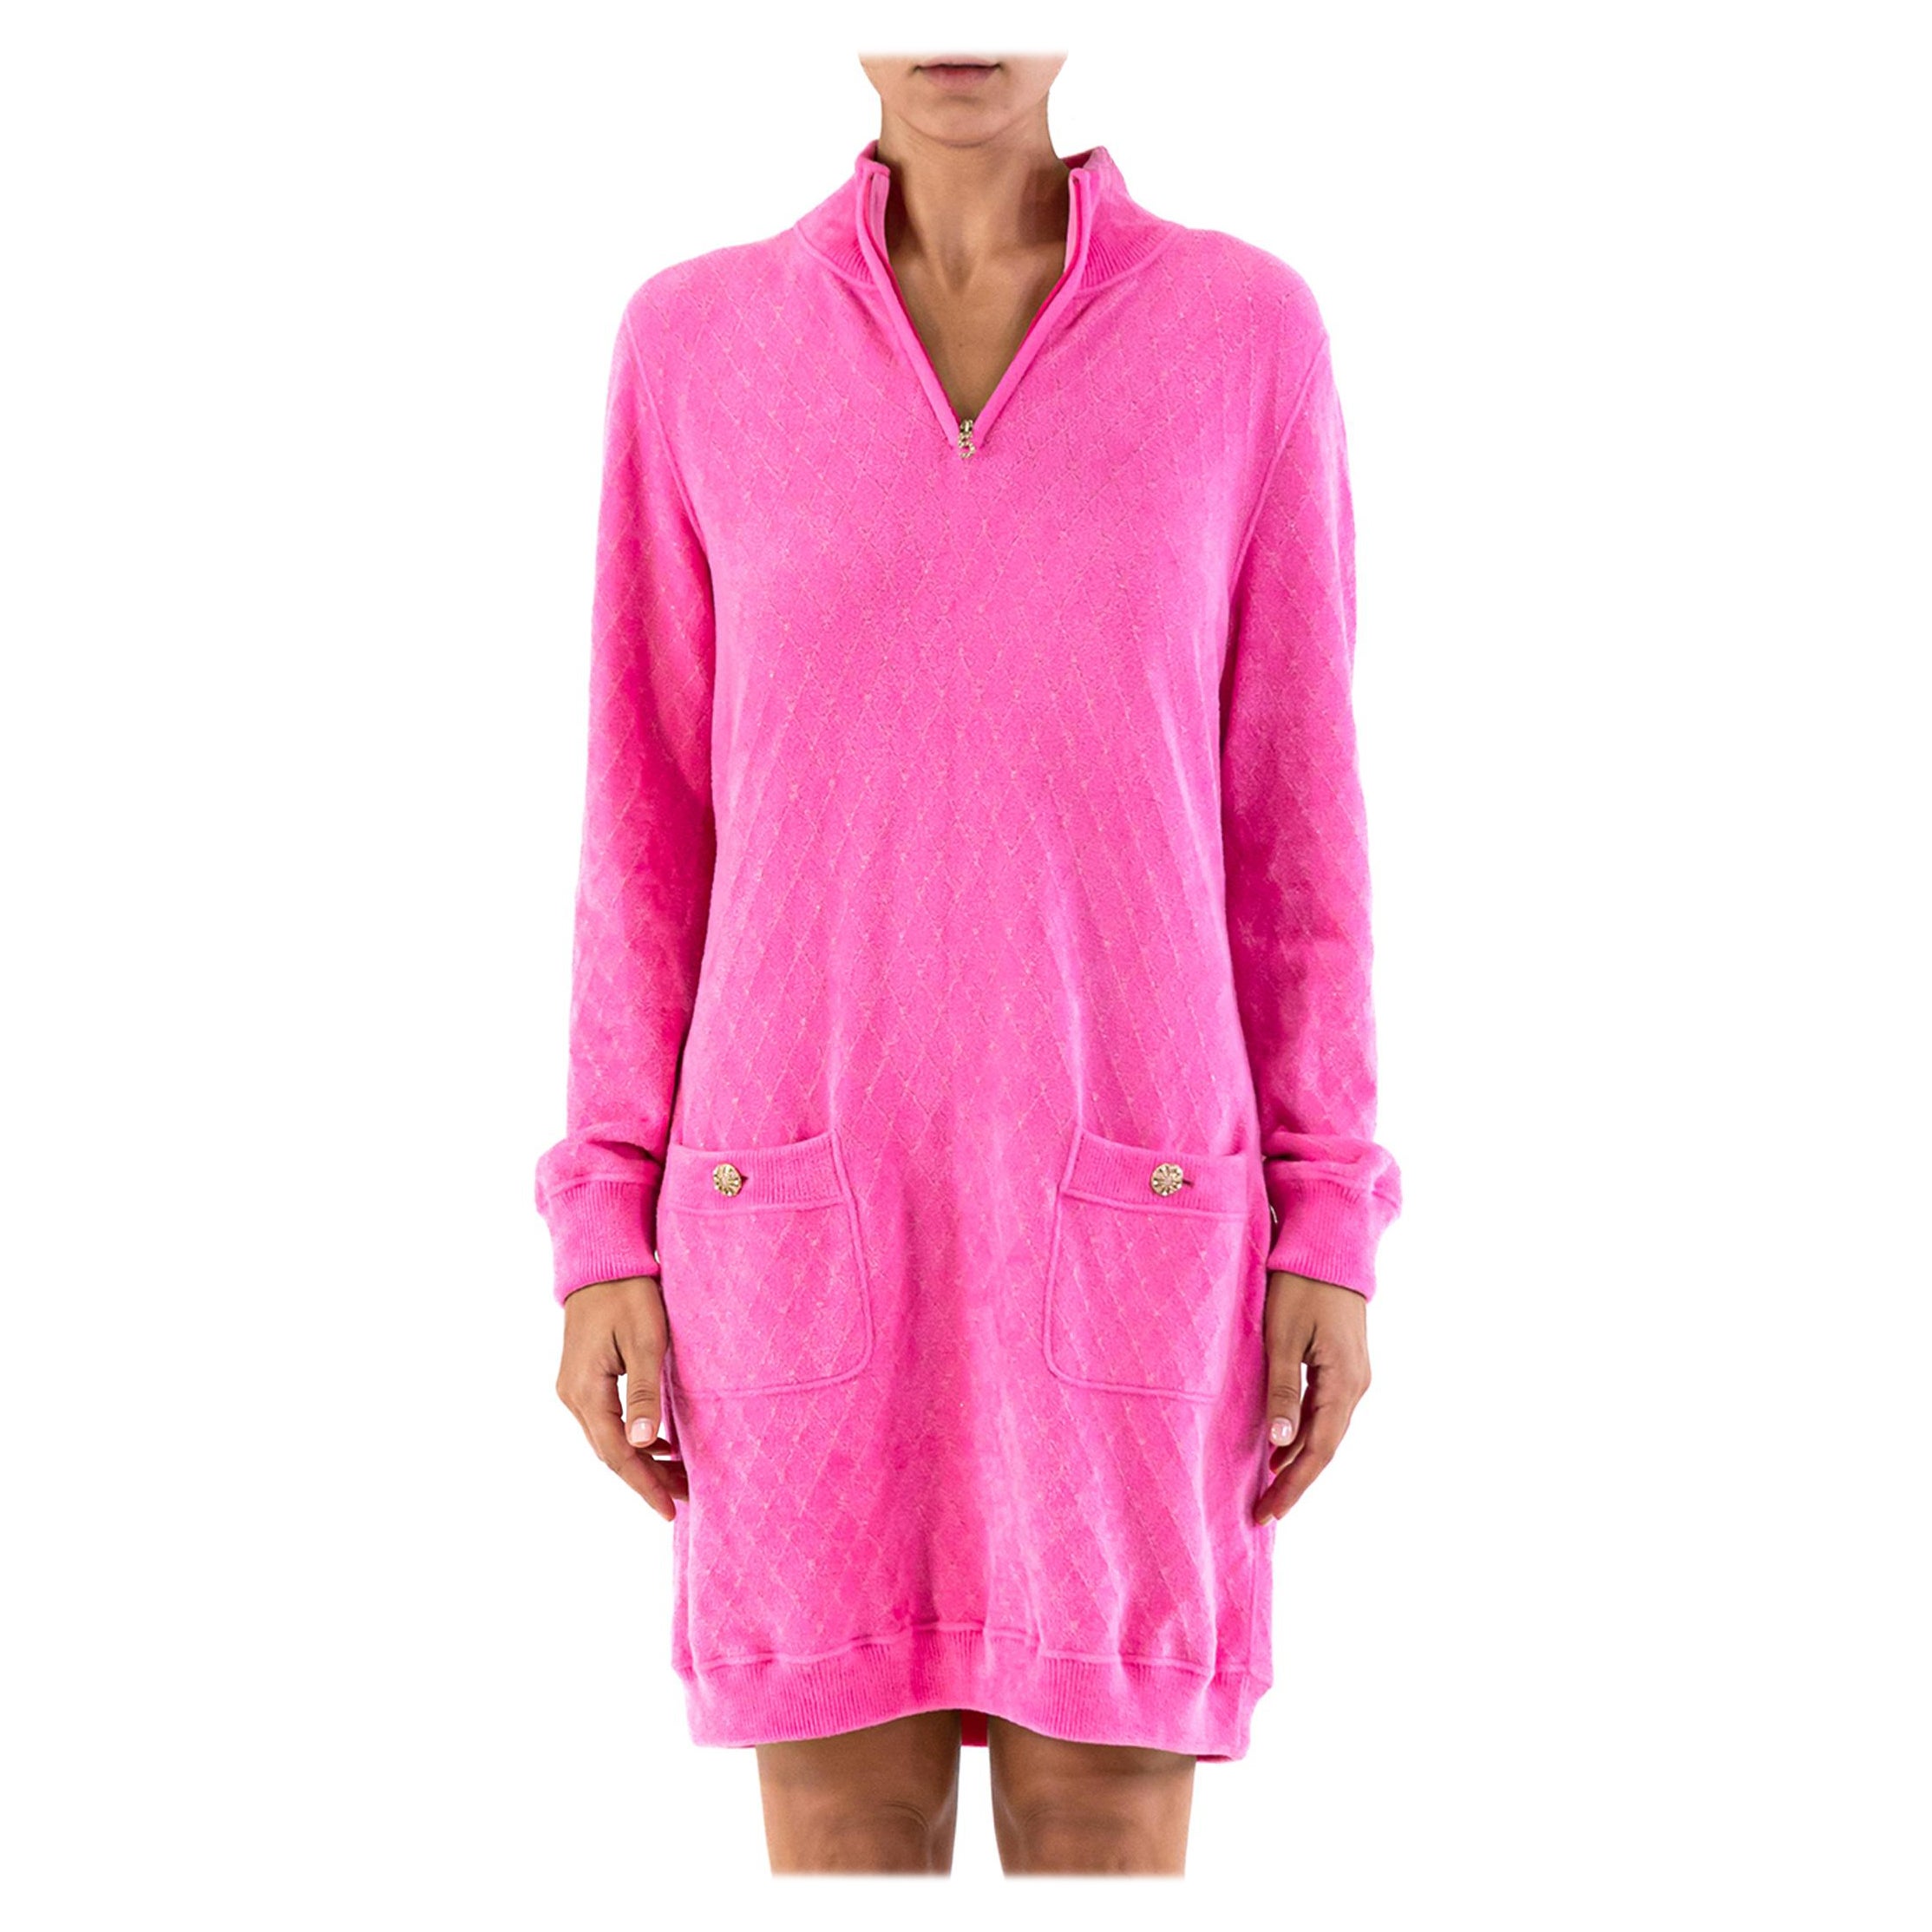 2000S Chanel Hot Pink Velour Dress For Sale